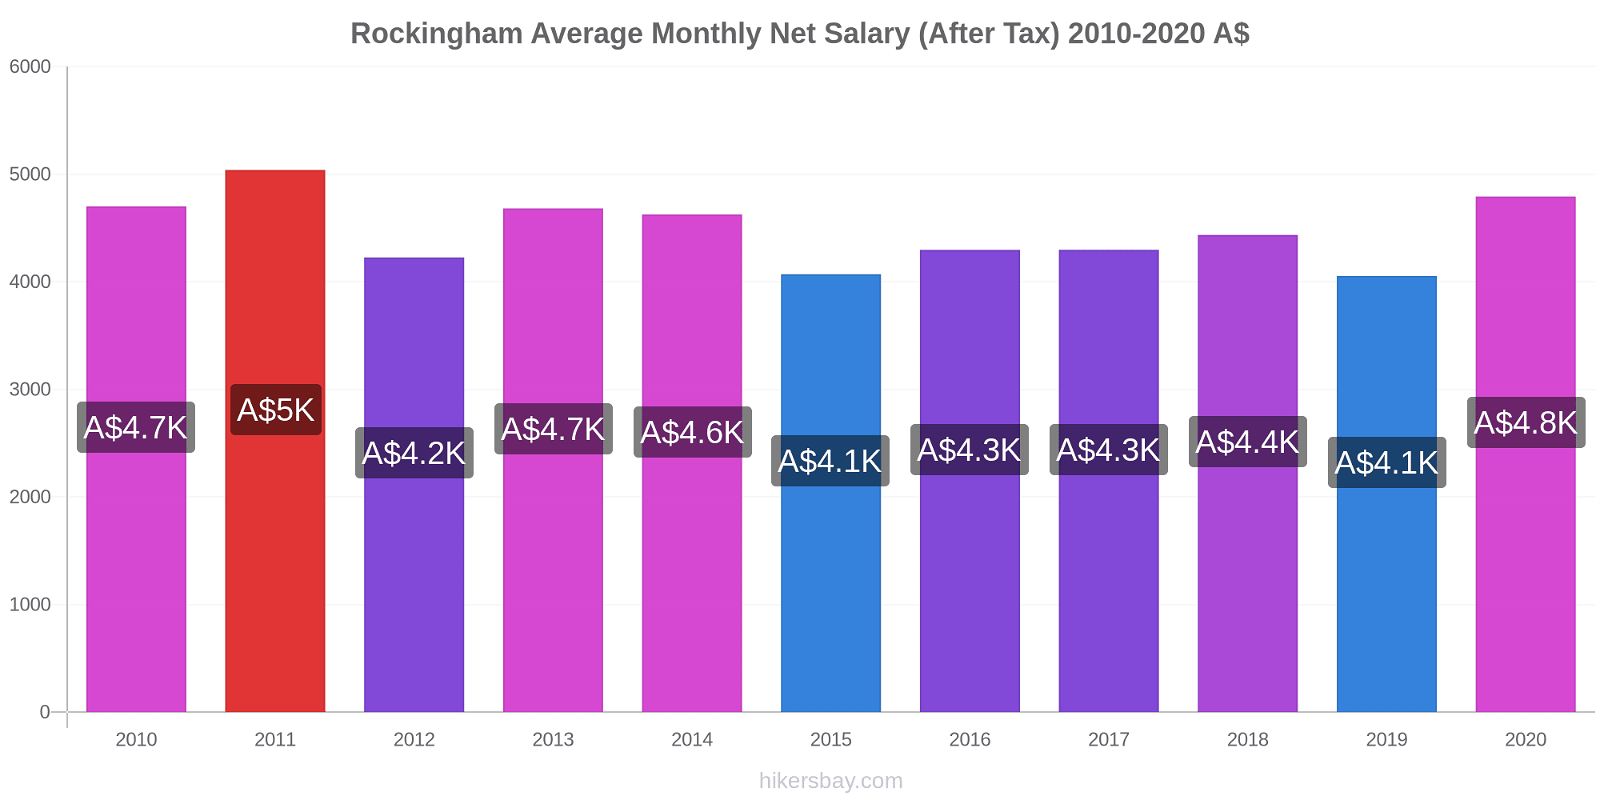 Rockingham price changes Average Monthly Net Salary (After Tax) hikersbay.com